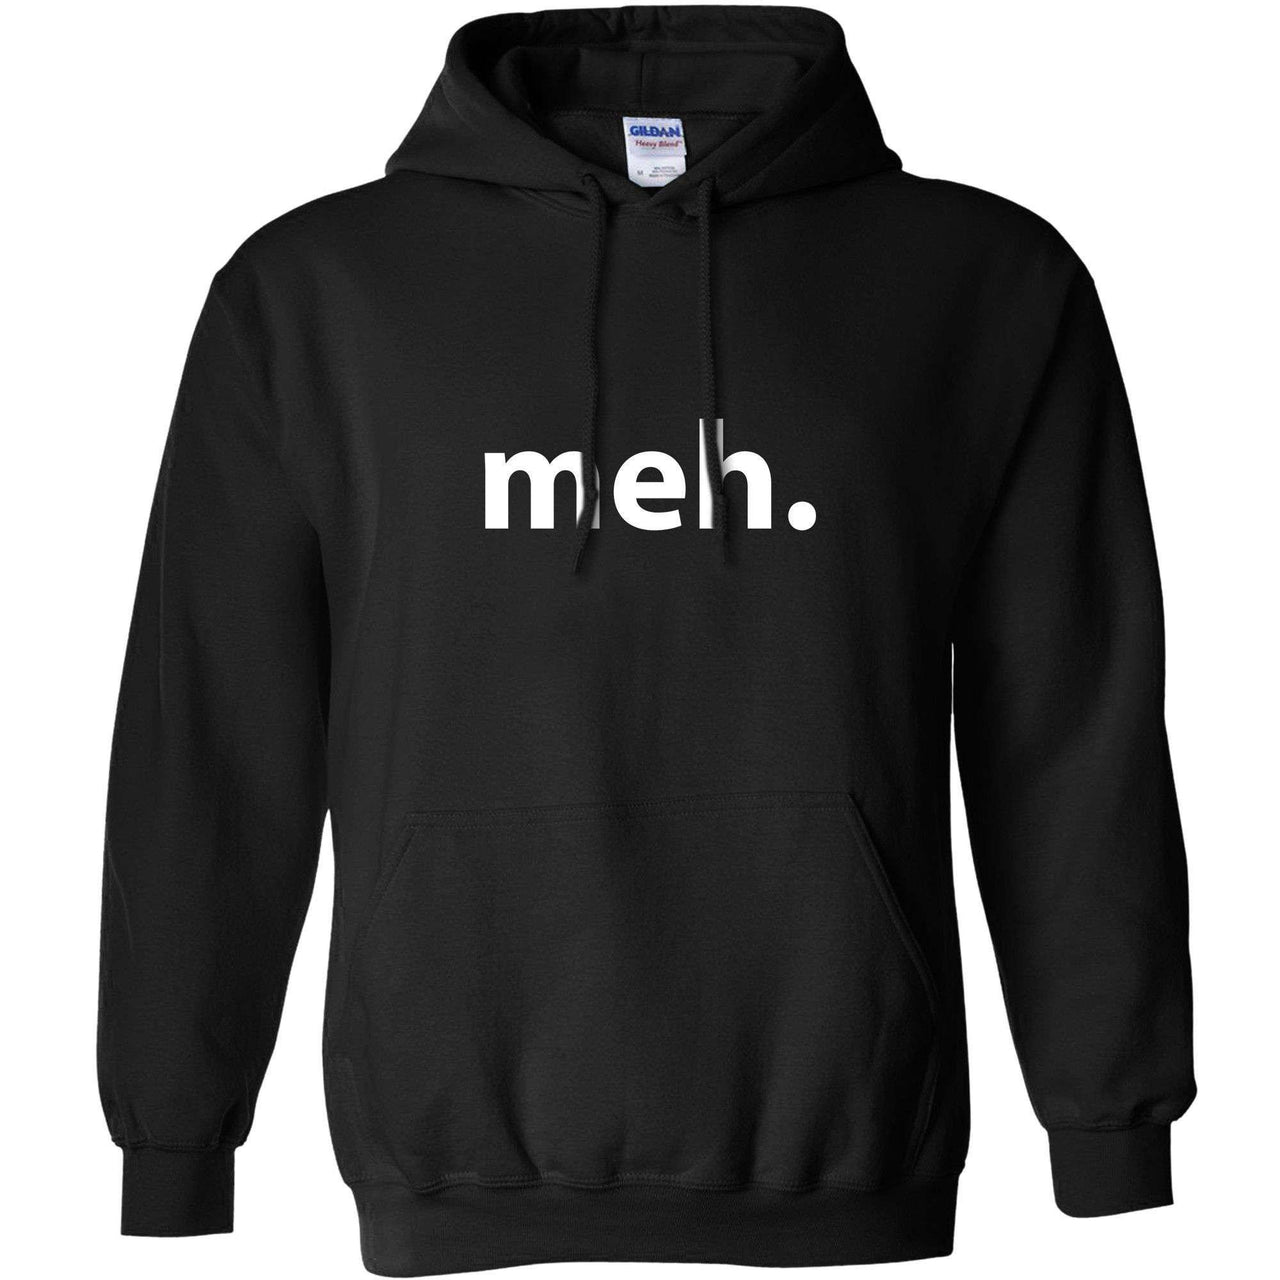 Meh Hoodie For Men and Women 8Ball